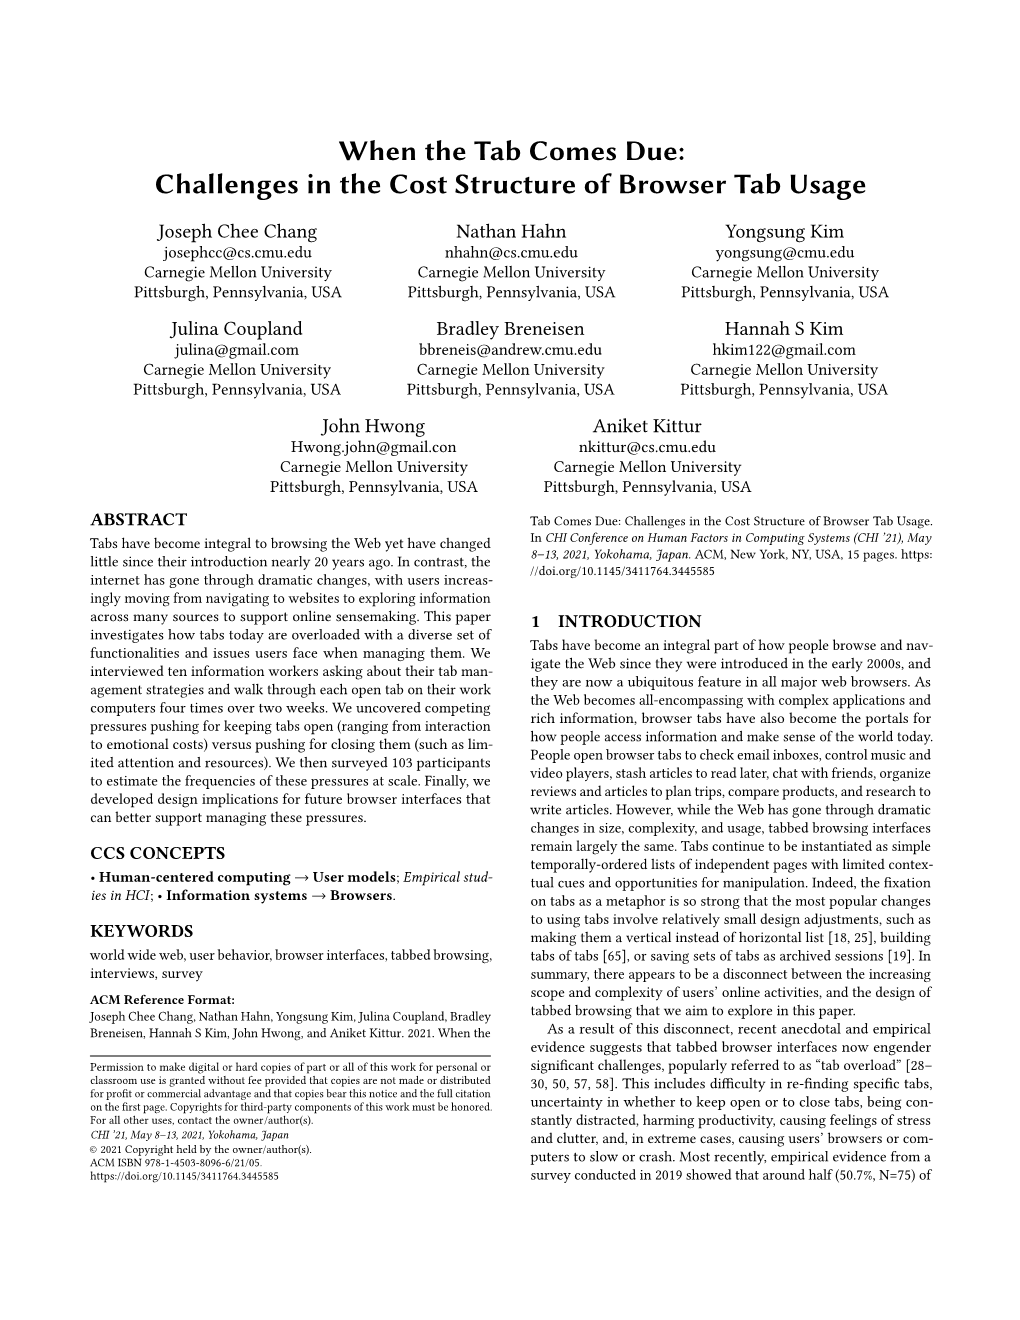 Challenges in the Cost Structure of Browser Tab Usage